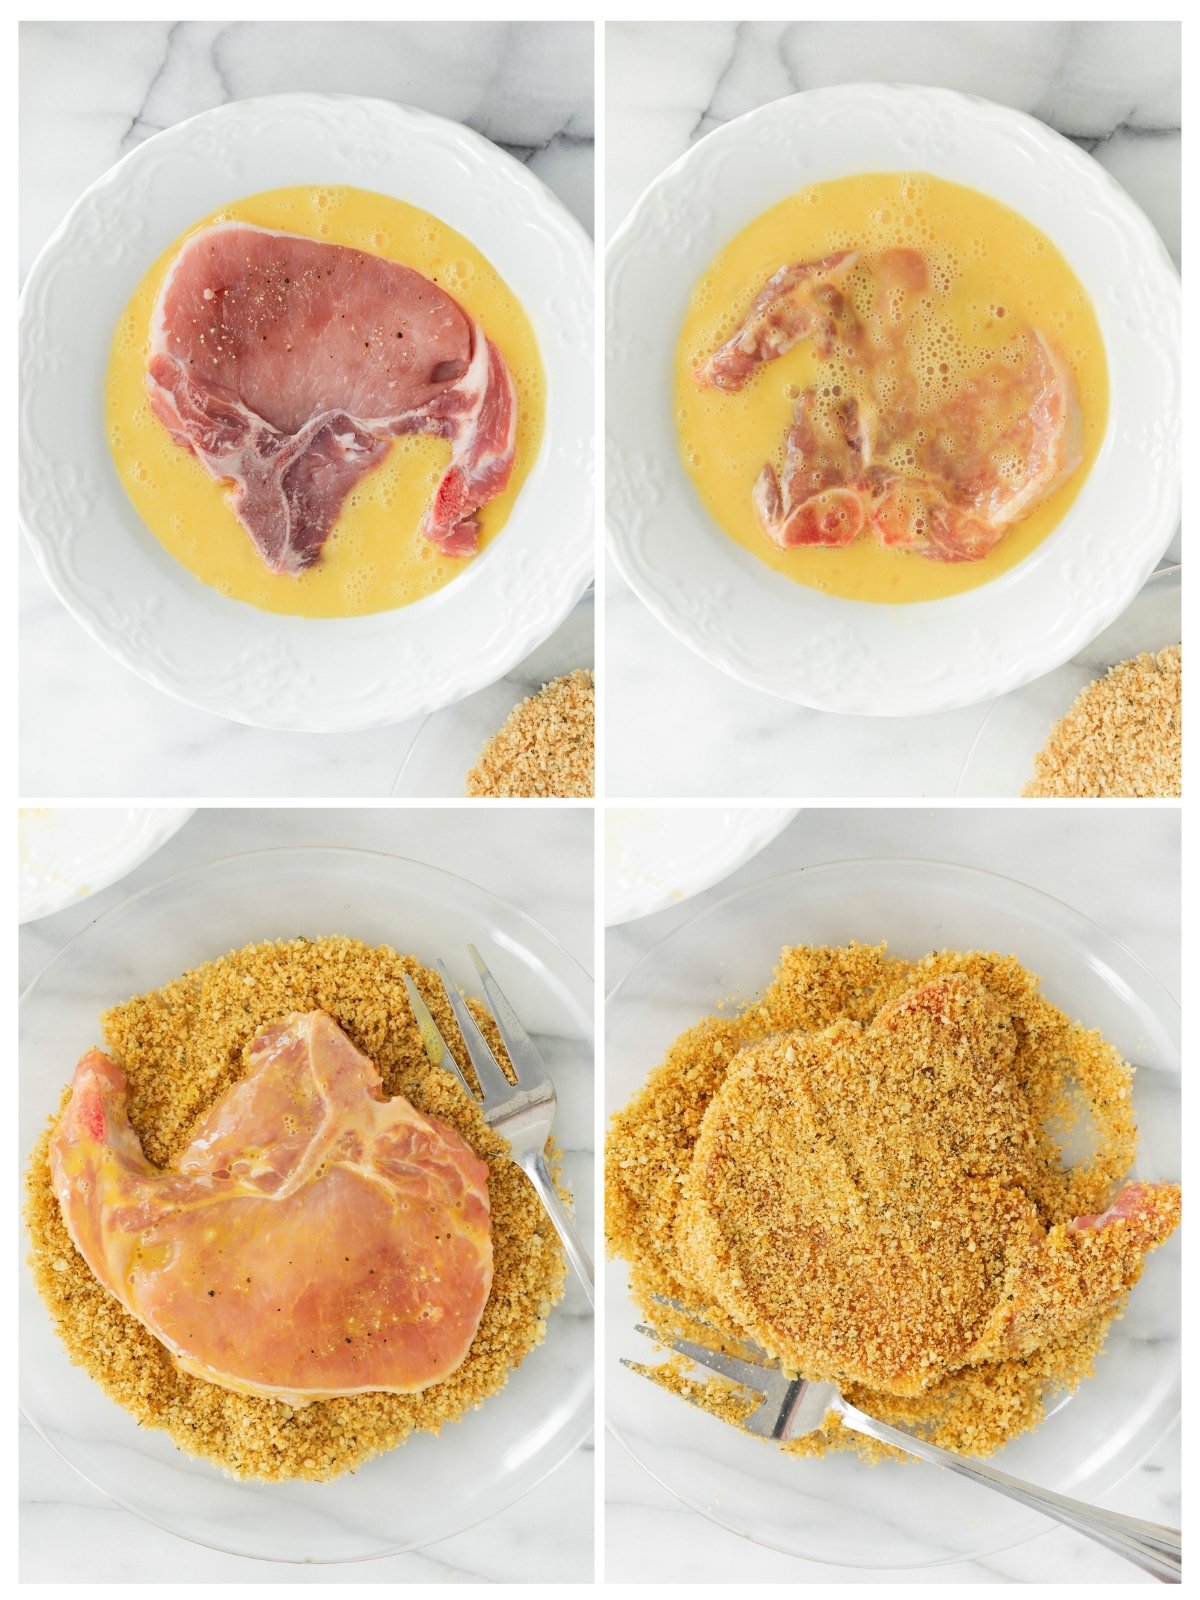 coating pork chops with egg and bread crumbs